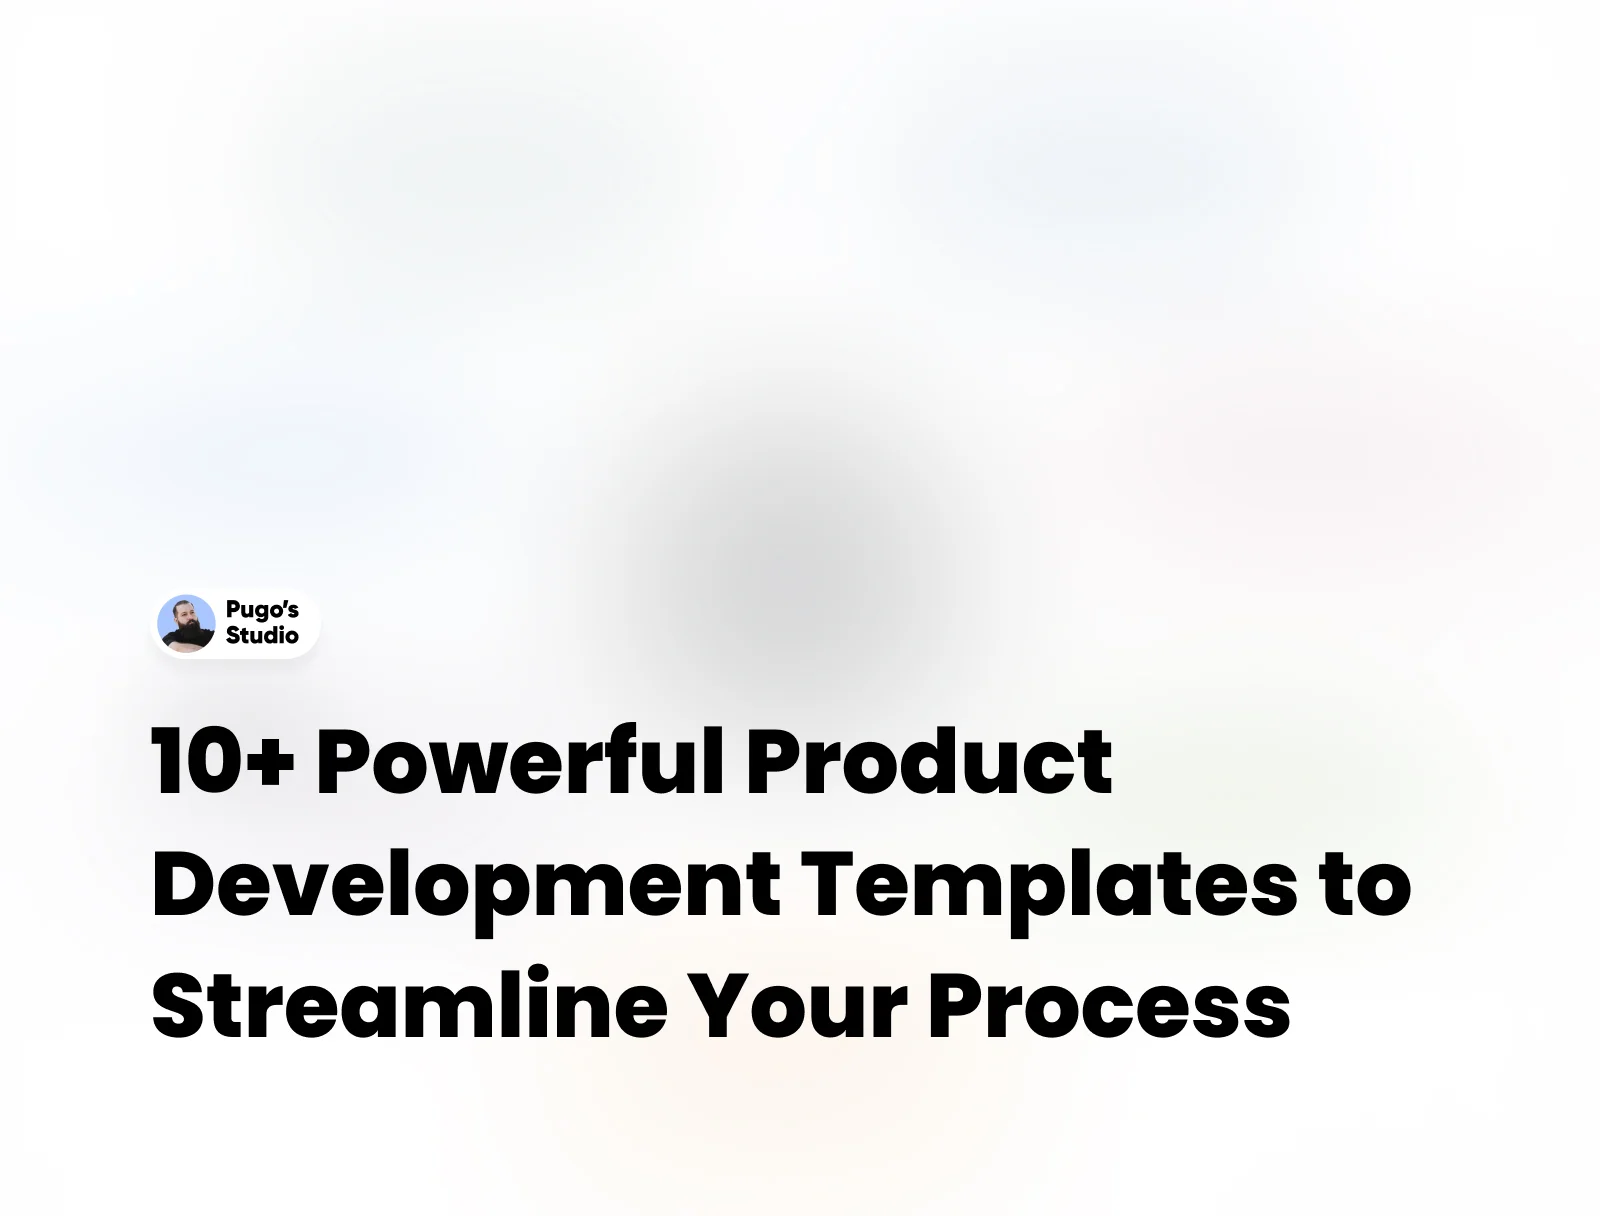 10+ Powerful Product Development Templates to Streamline Your Process